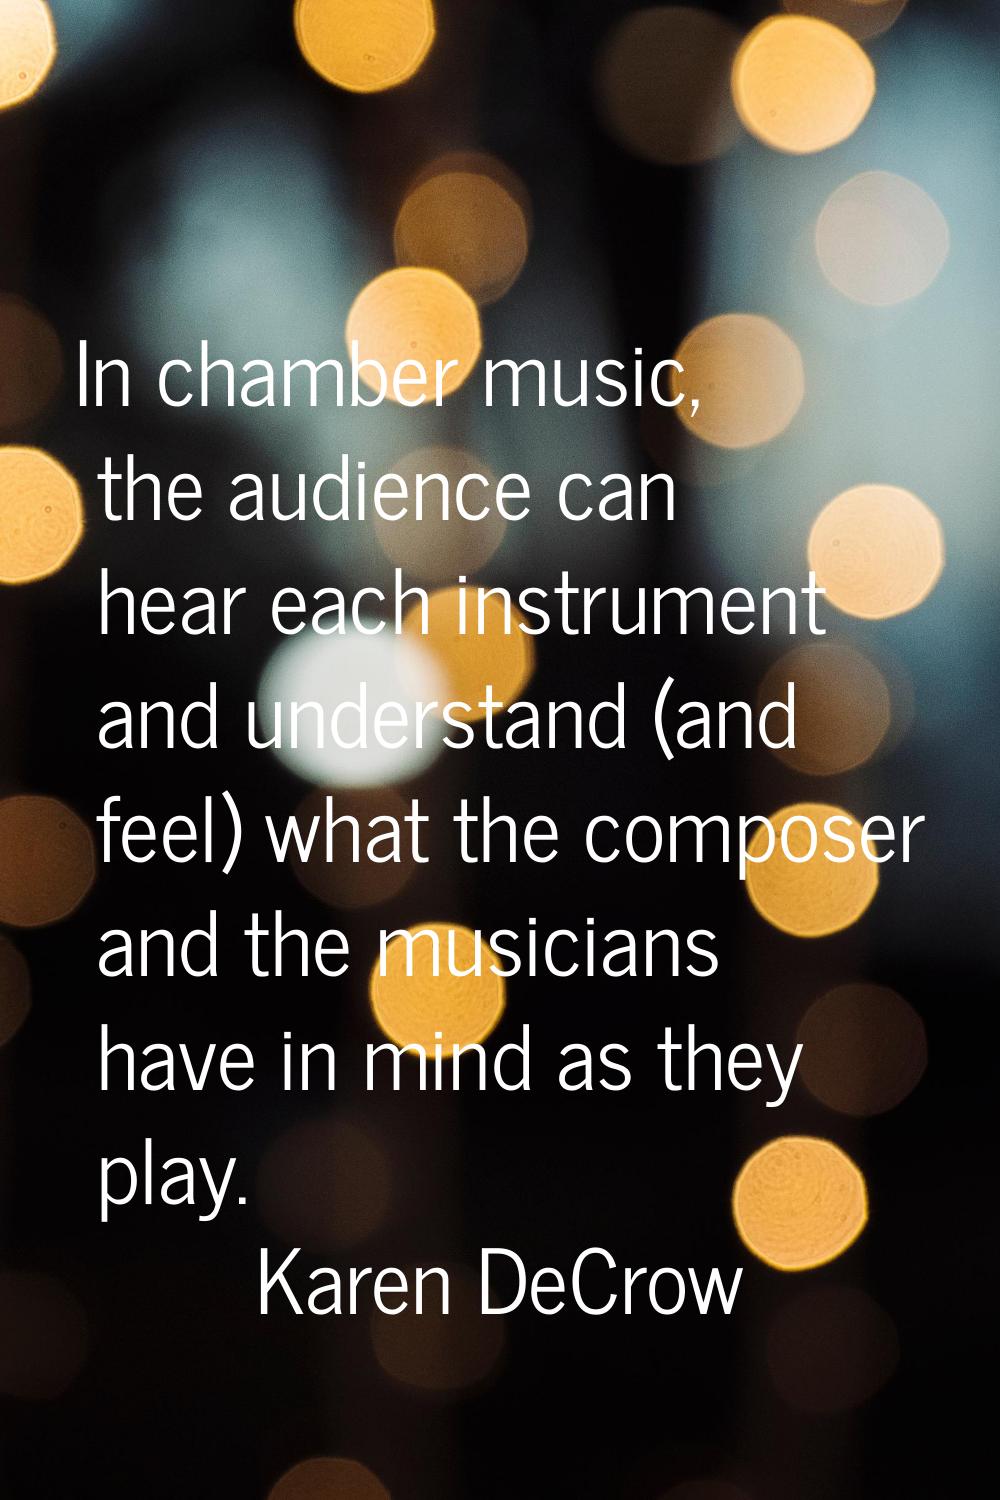 In chamber music, the audience can hear each instrument and understand (and feel) what the composer